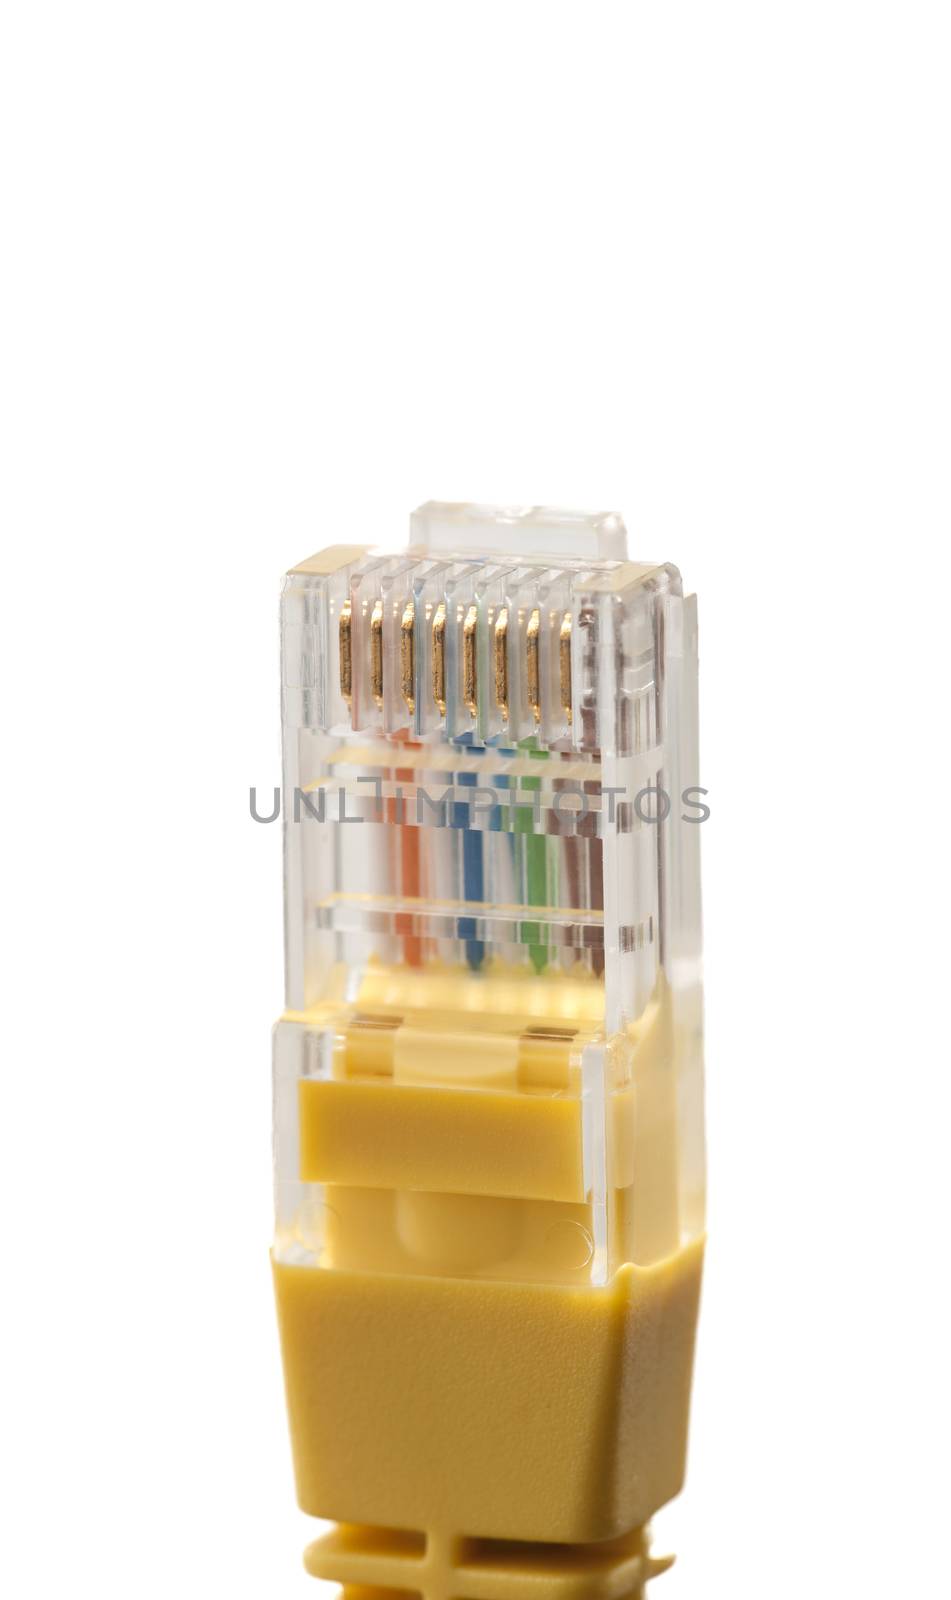 Category 5 cable (Cat 5) is a twisted pair cable for carrying signals. This type of cable is used in structured cabling for computer networks such as Ethernet.